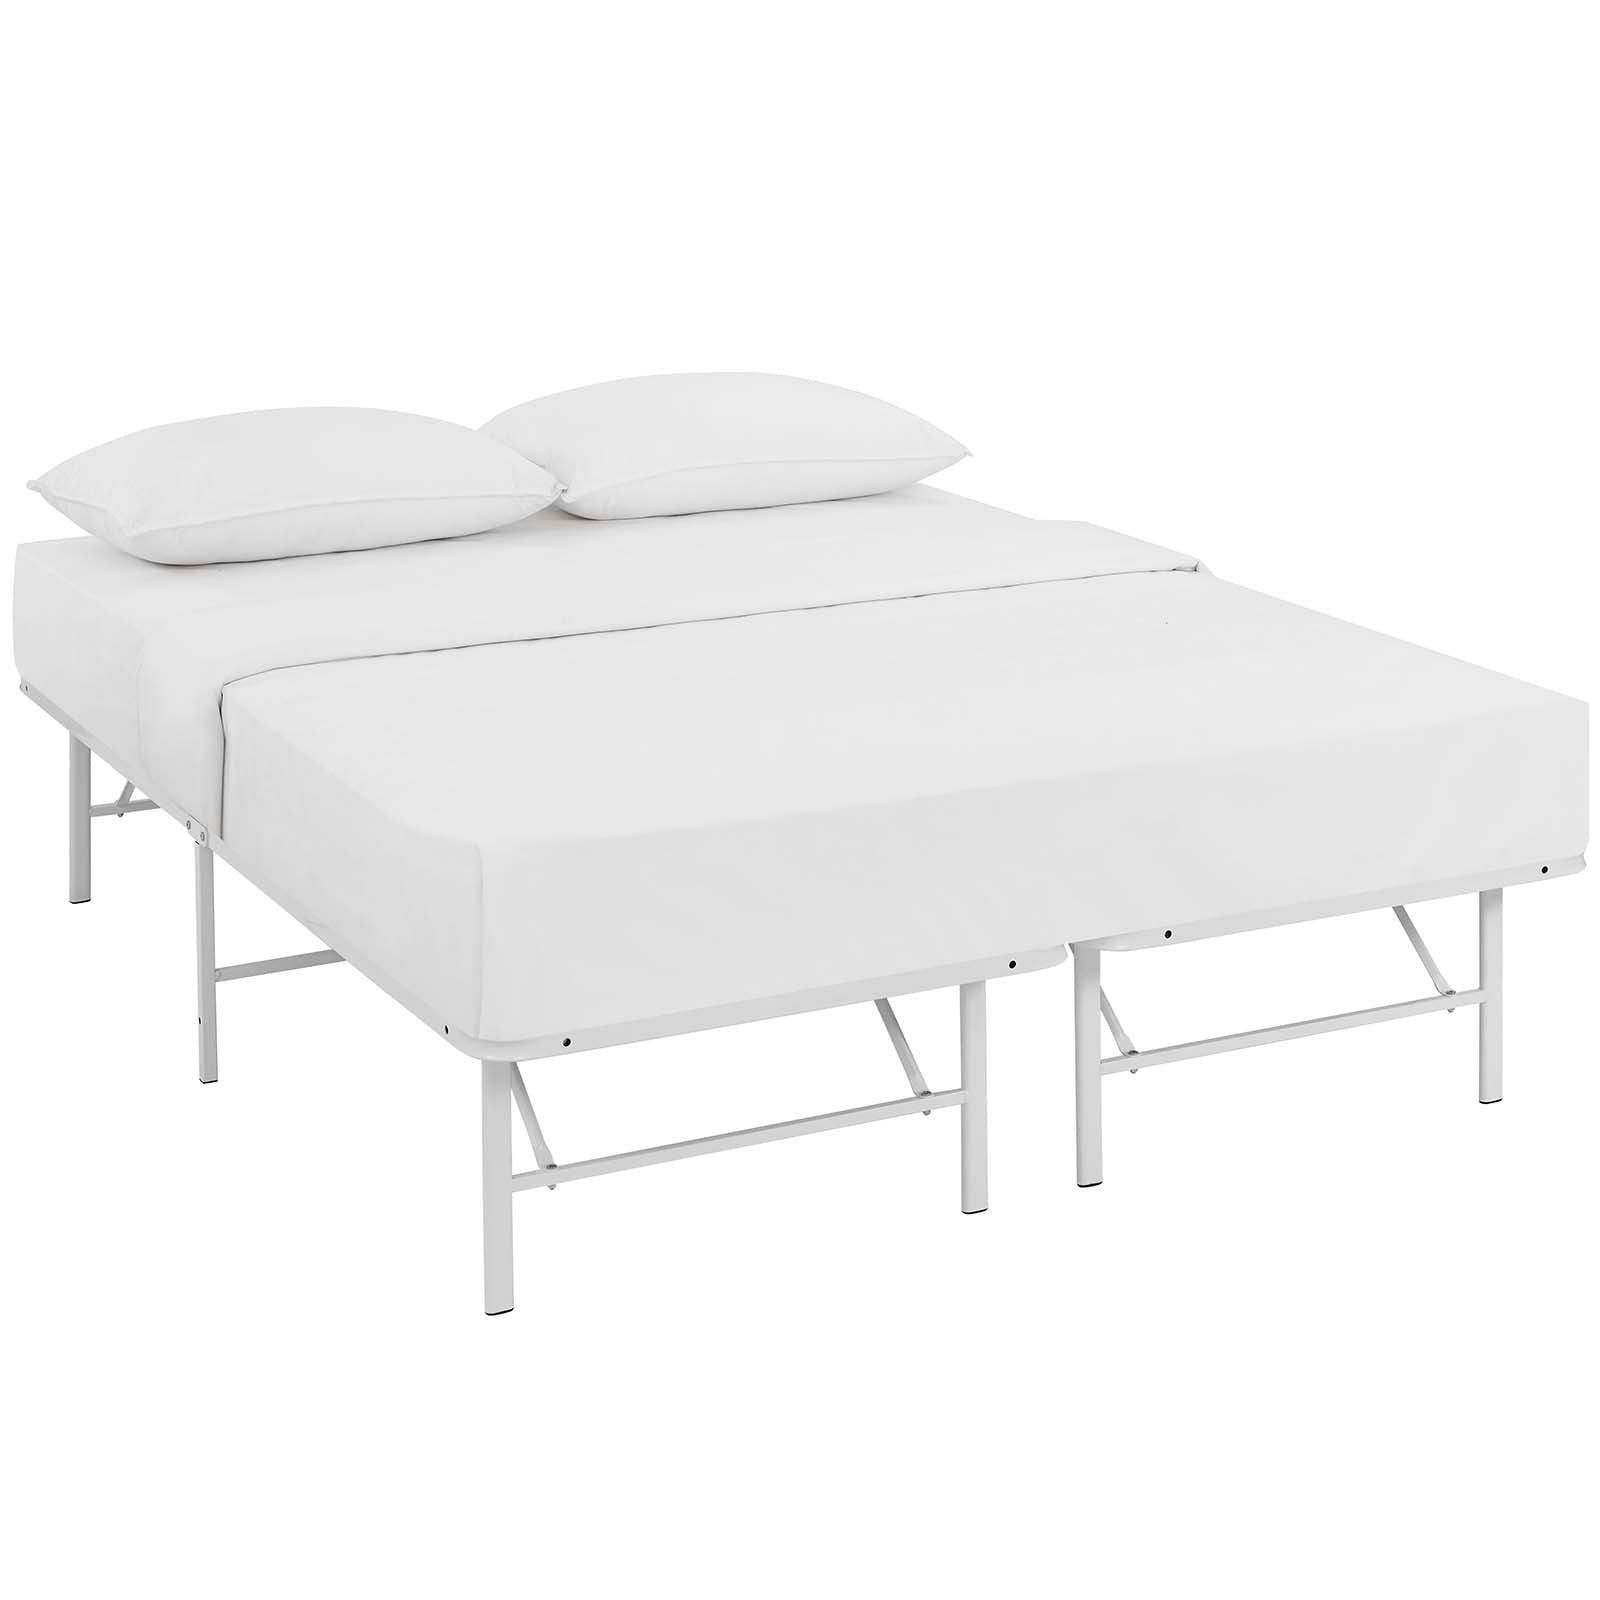 Modway Beds - Horizon Full Stainless Steel Bed Frame White